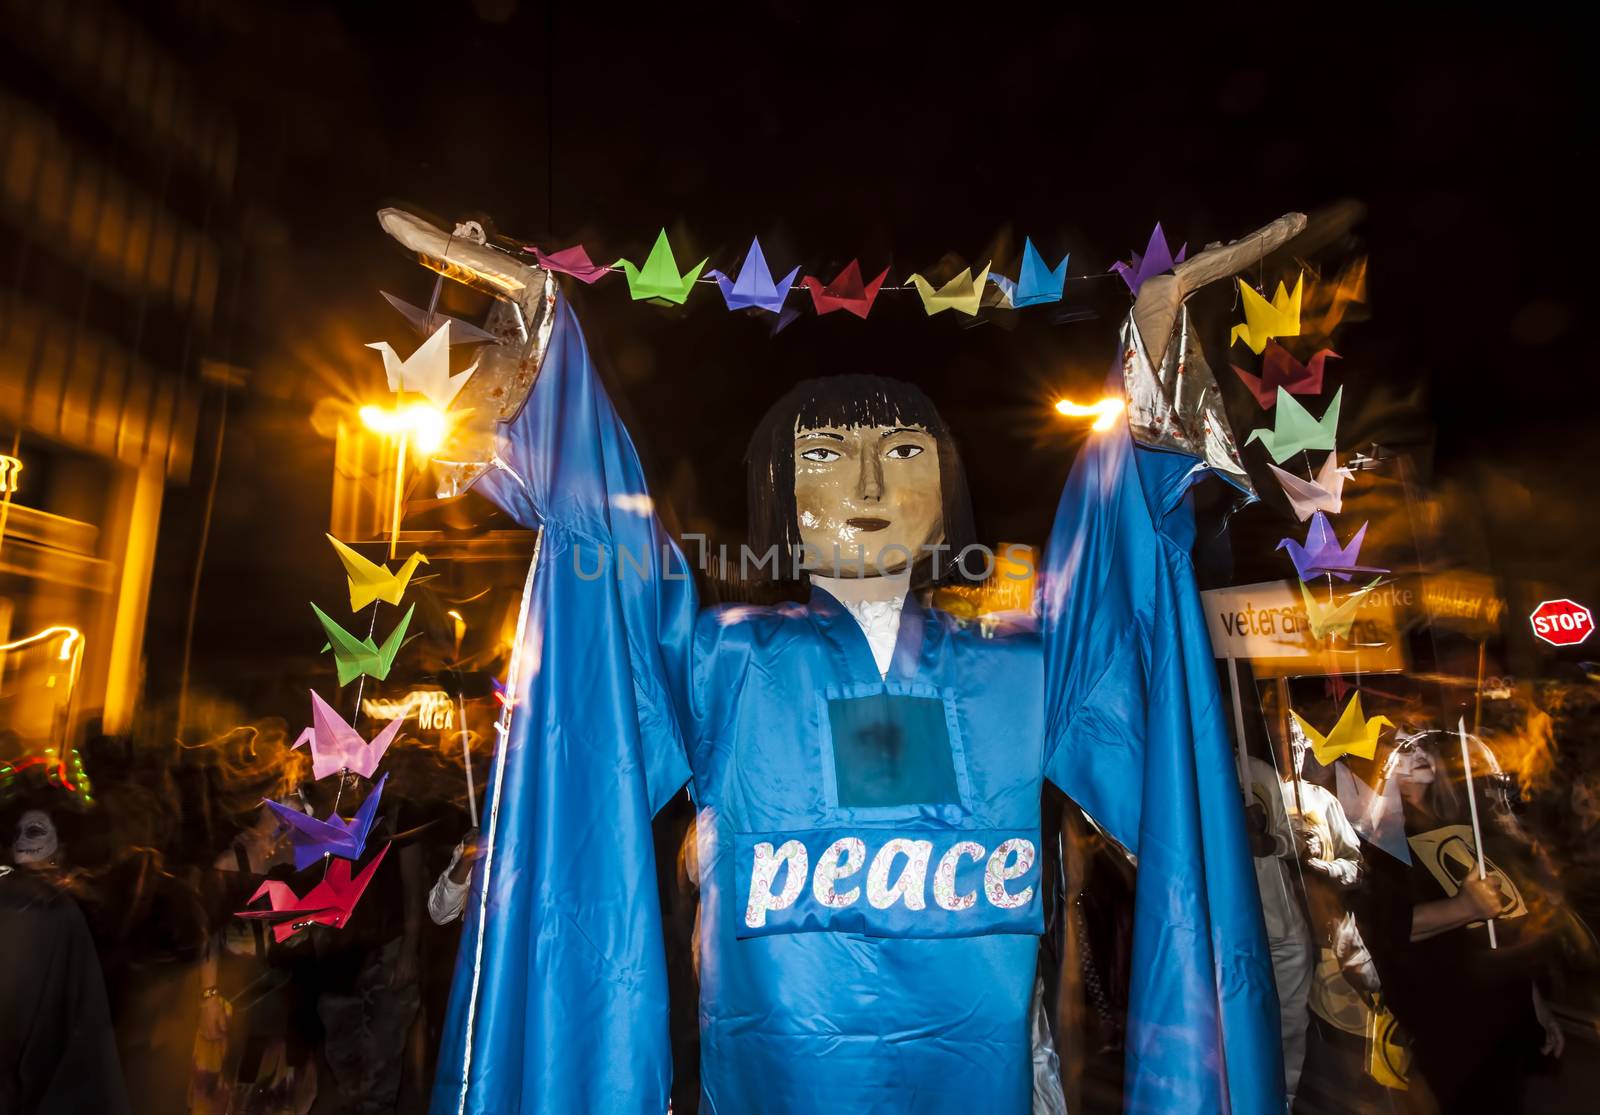 TUCSON, AZ/USA - NOVEMBER 09: Unidentified people with large figure in the All Souls Procession on November 09, 2014 in Tucson, AZ, USA.